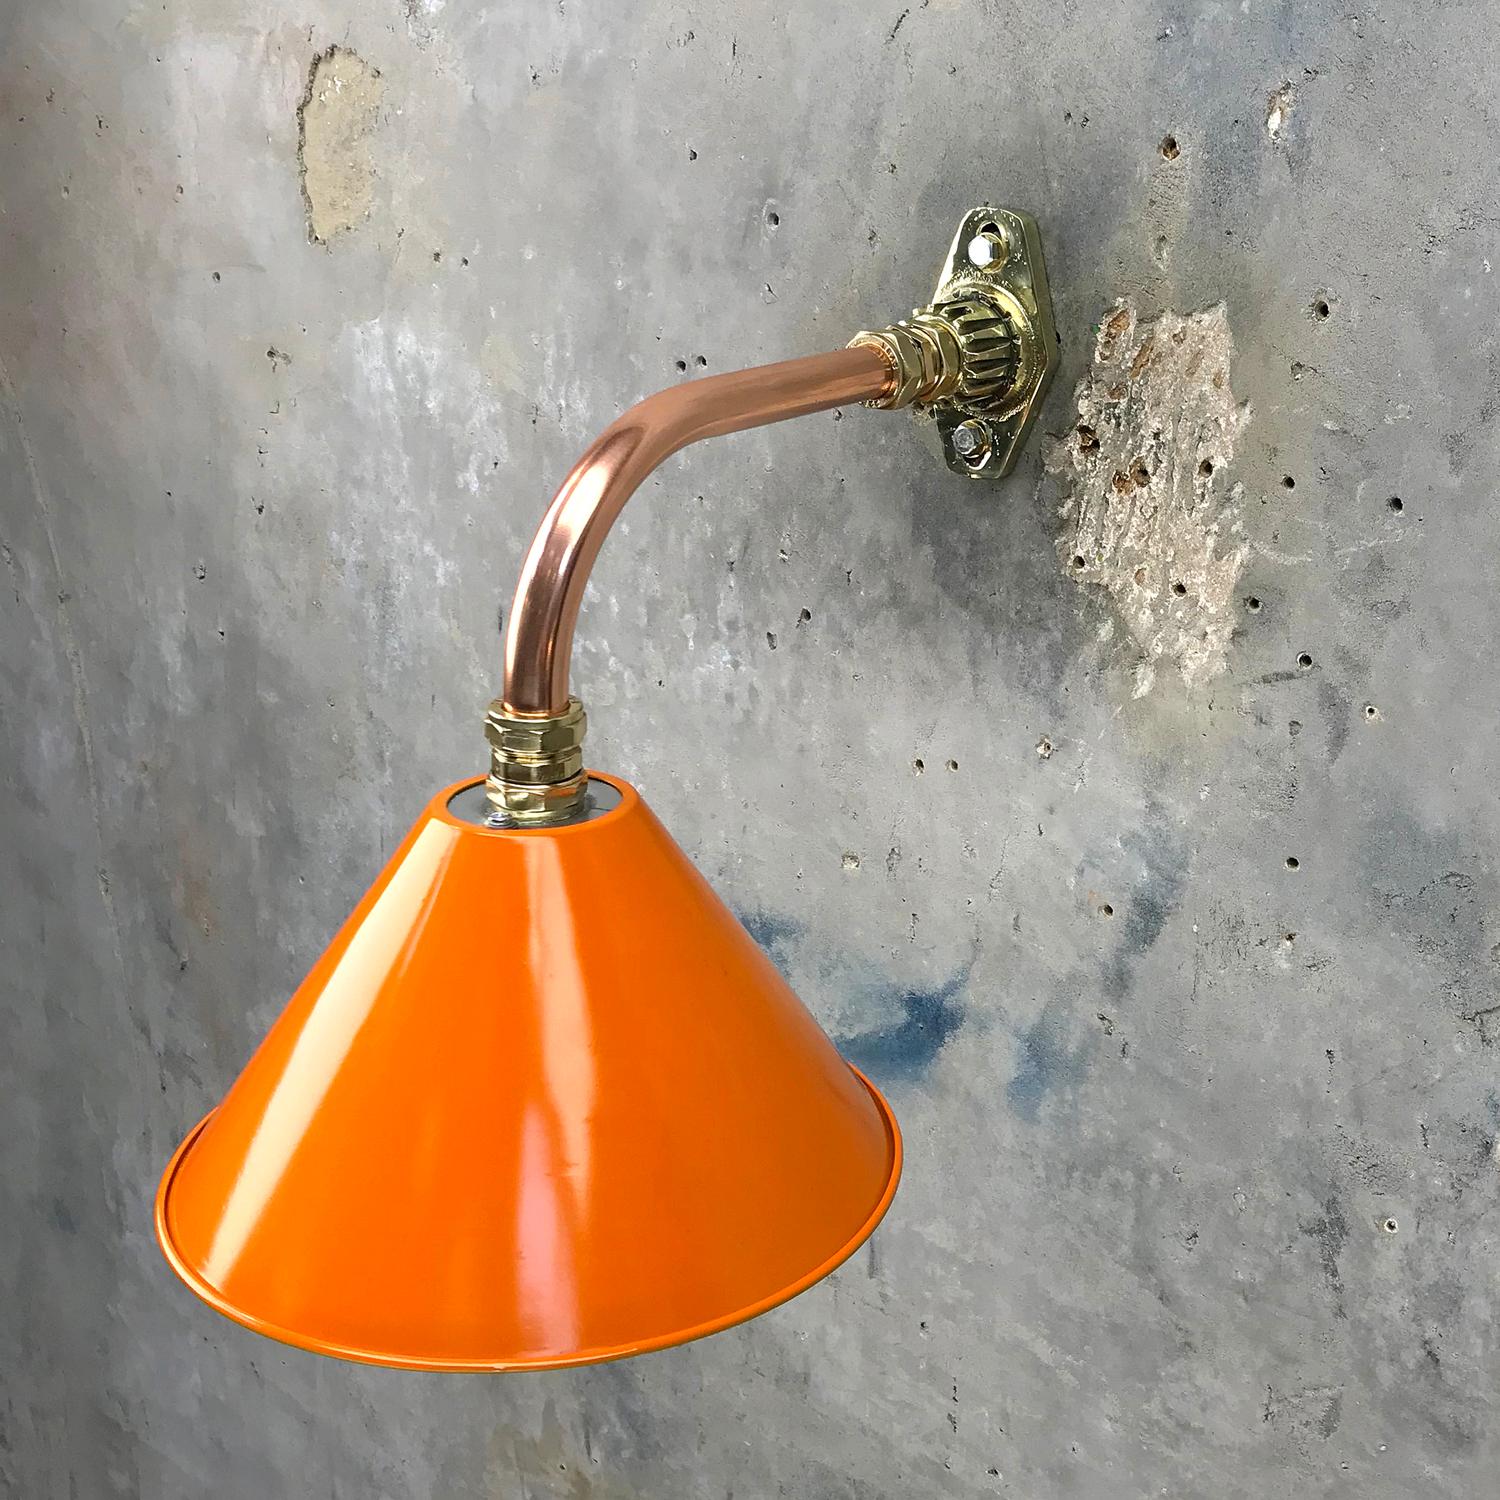 1980s Ex British Army Light Shade / Copper & Brass Cantilever, Custom Colours For Sale 6